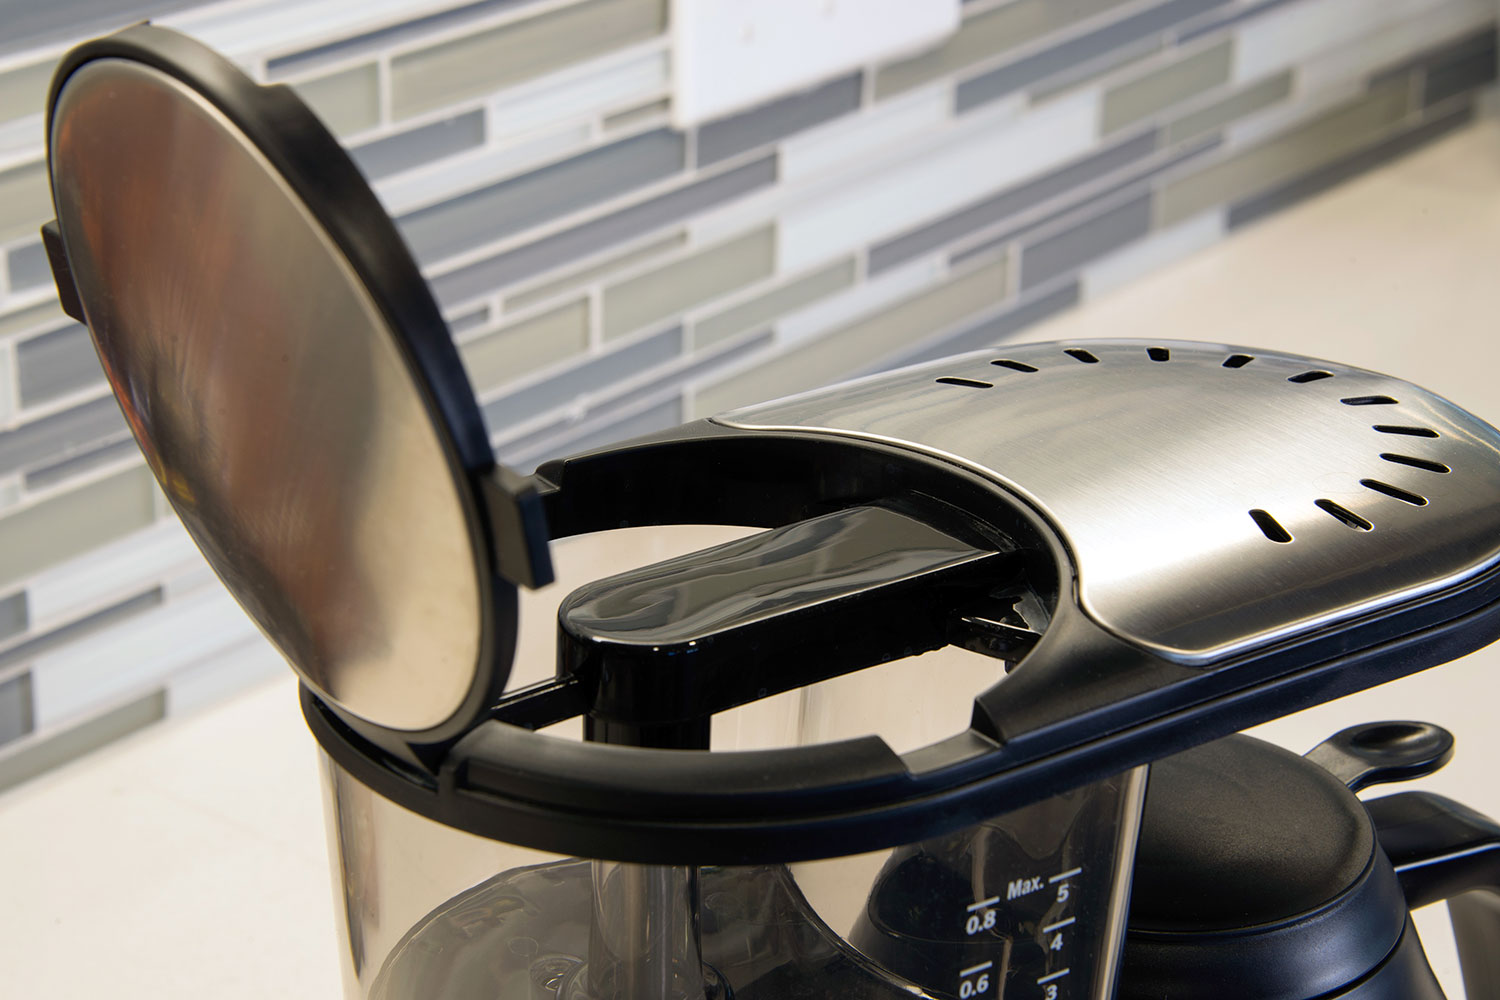 Our review of the Bonavita BV1800 coffee maker.